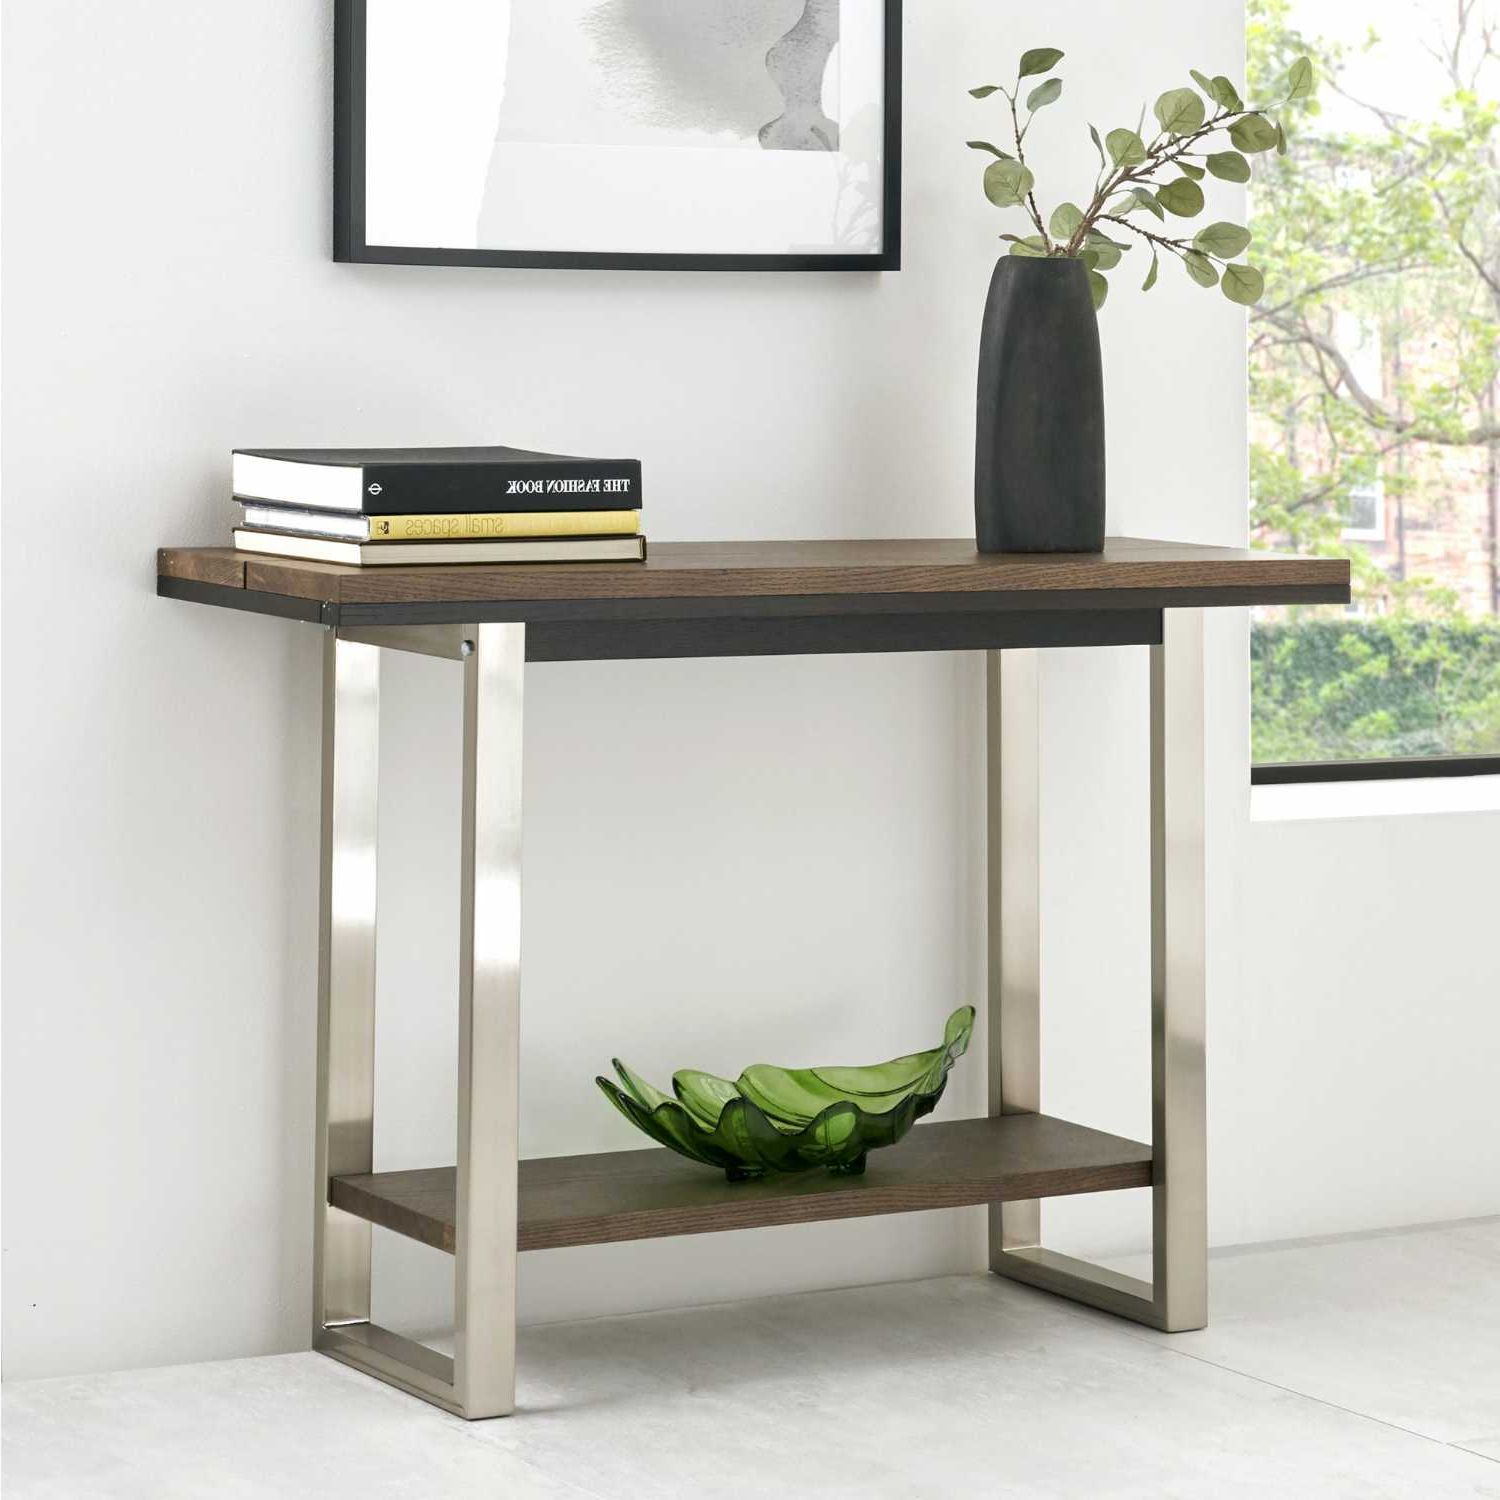 Tivoli Dark Oiled Oak Brushed Nickel Metal Framed Console In Well Known Metal And Mission Oak Console Tables (View 1 of 10)